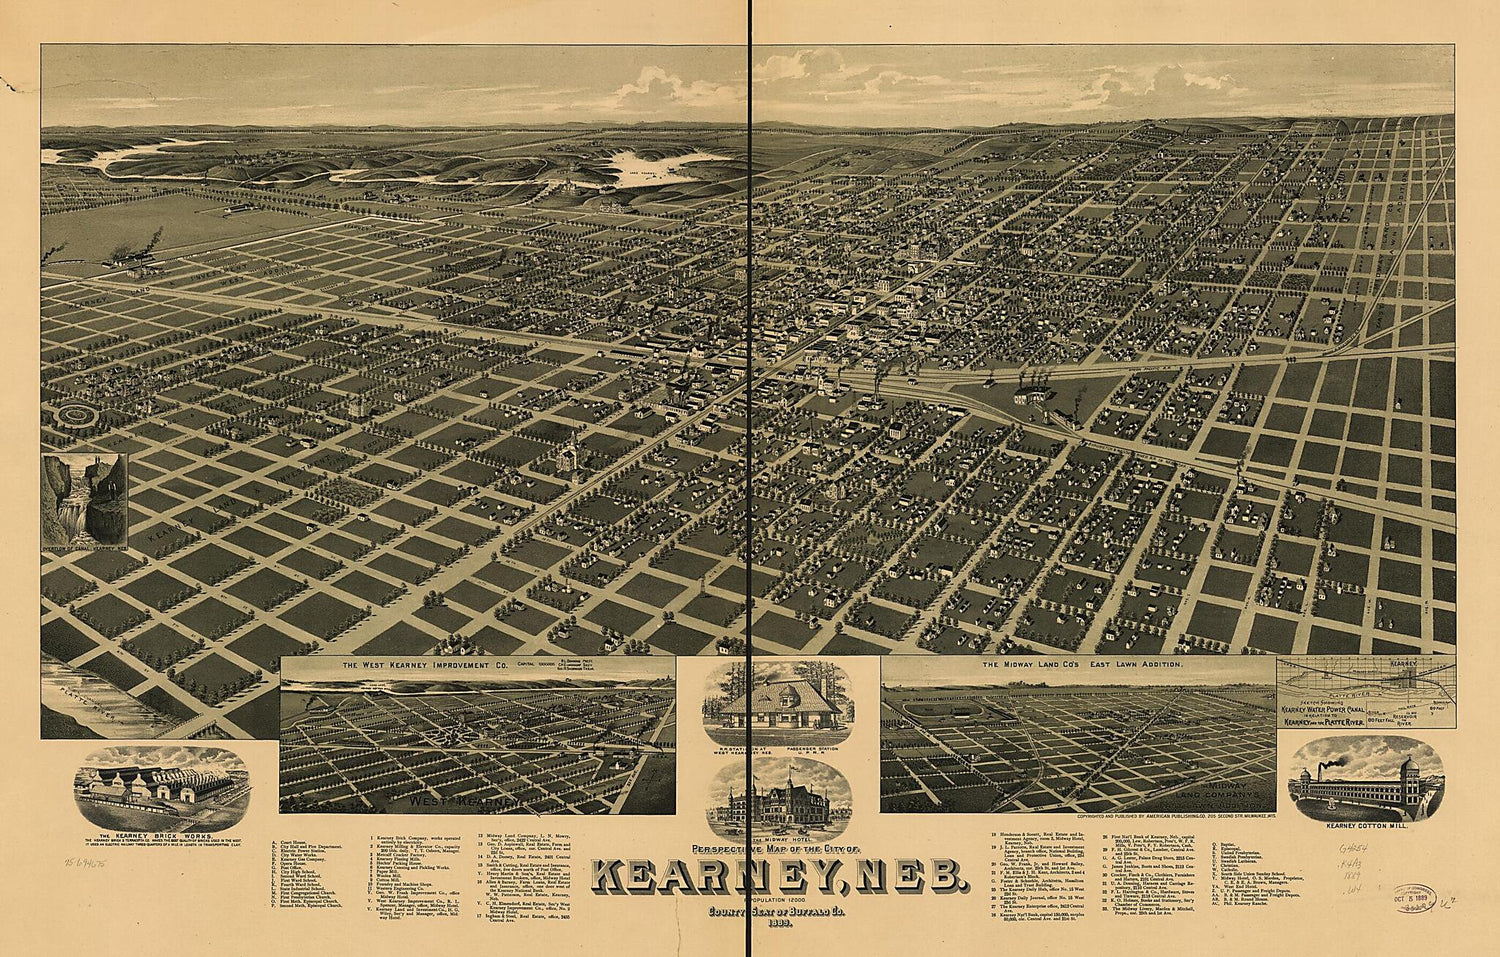 This old map of Perspective Map of the City of Kearney, Neb. County Seat of Buffalo County from 1889 was created by Wis.) American Publishing Co. (Milwaukee, H. (Henry) Wellge in 1889